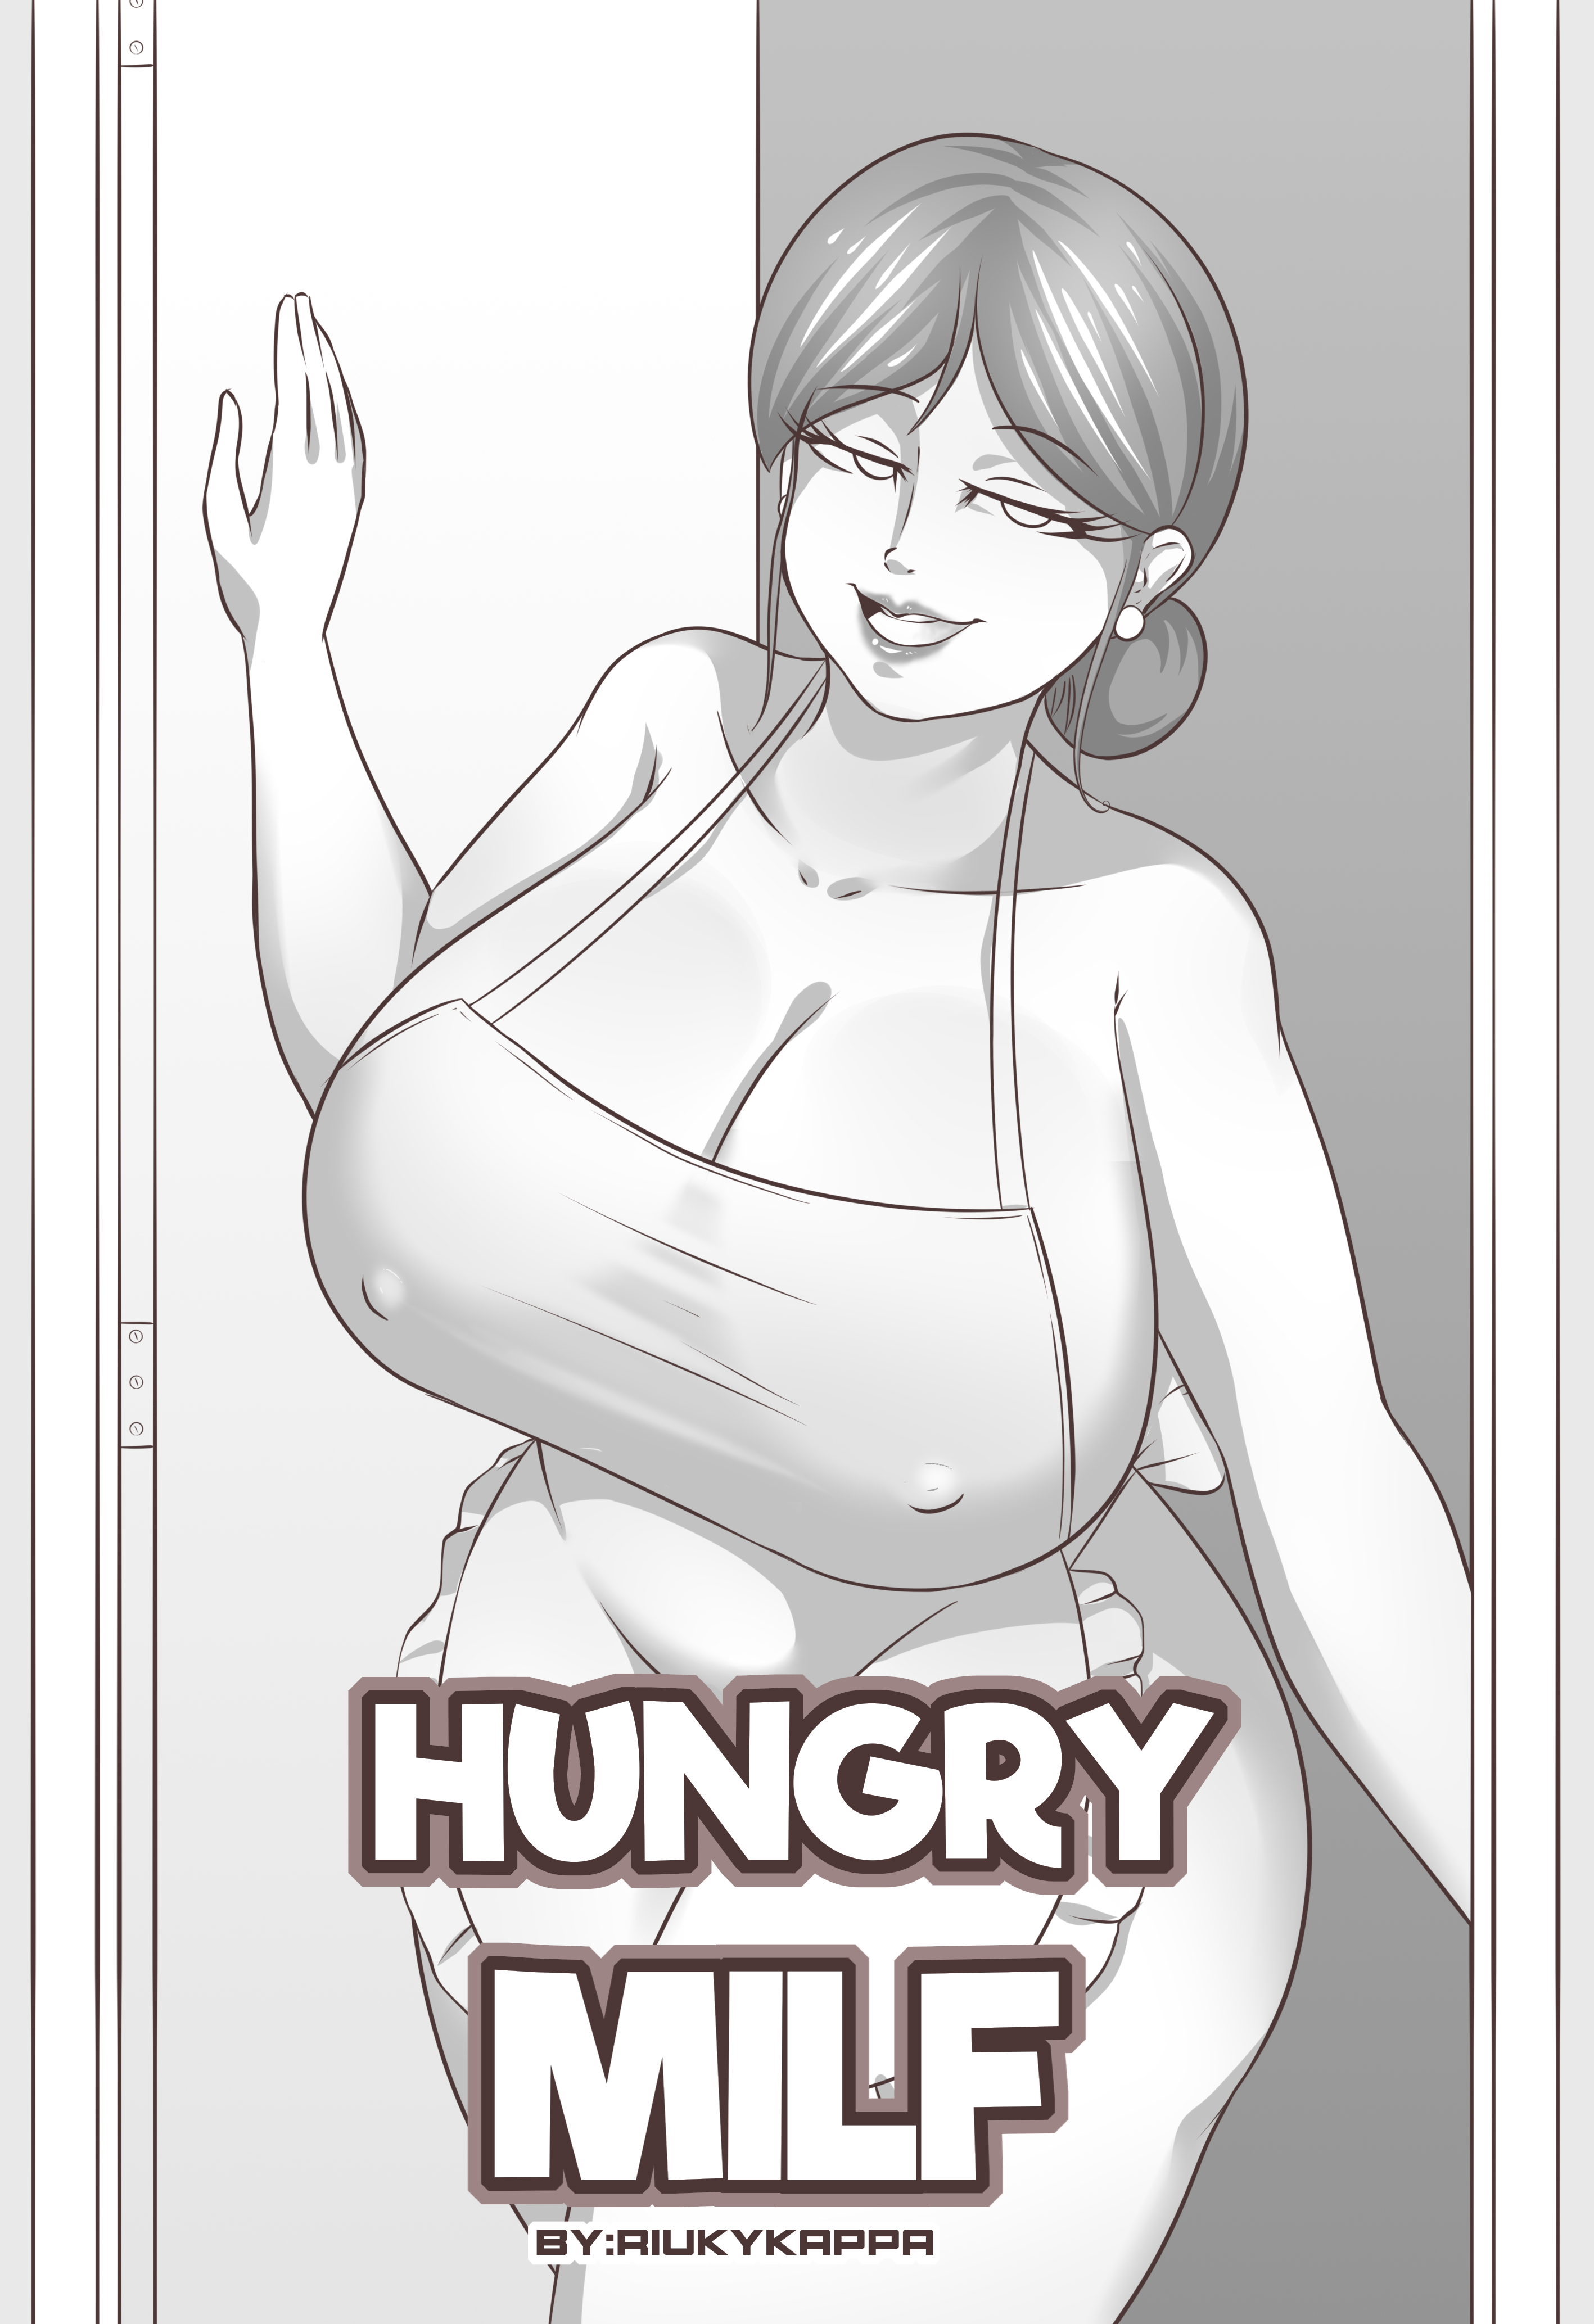 Audio Doujins: Feeding the Hungry Milf More Than Just Pizza